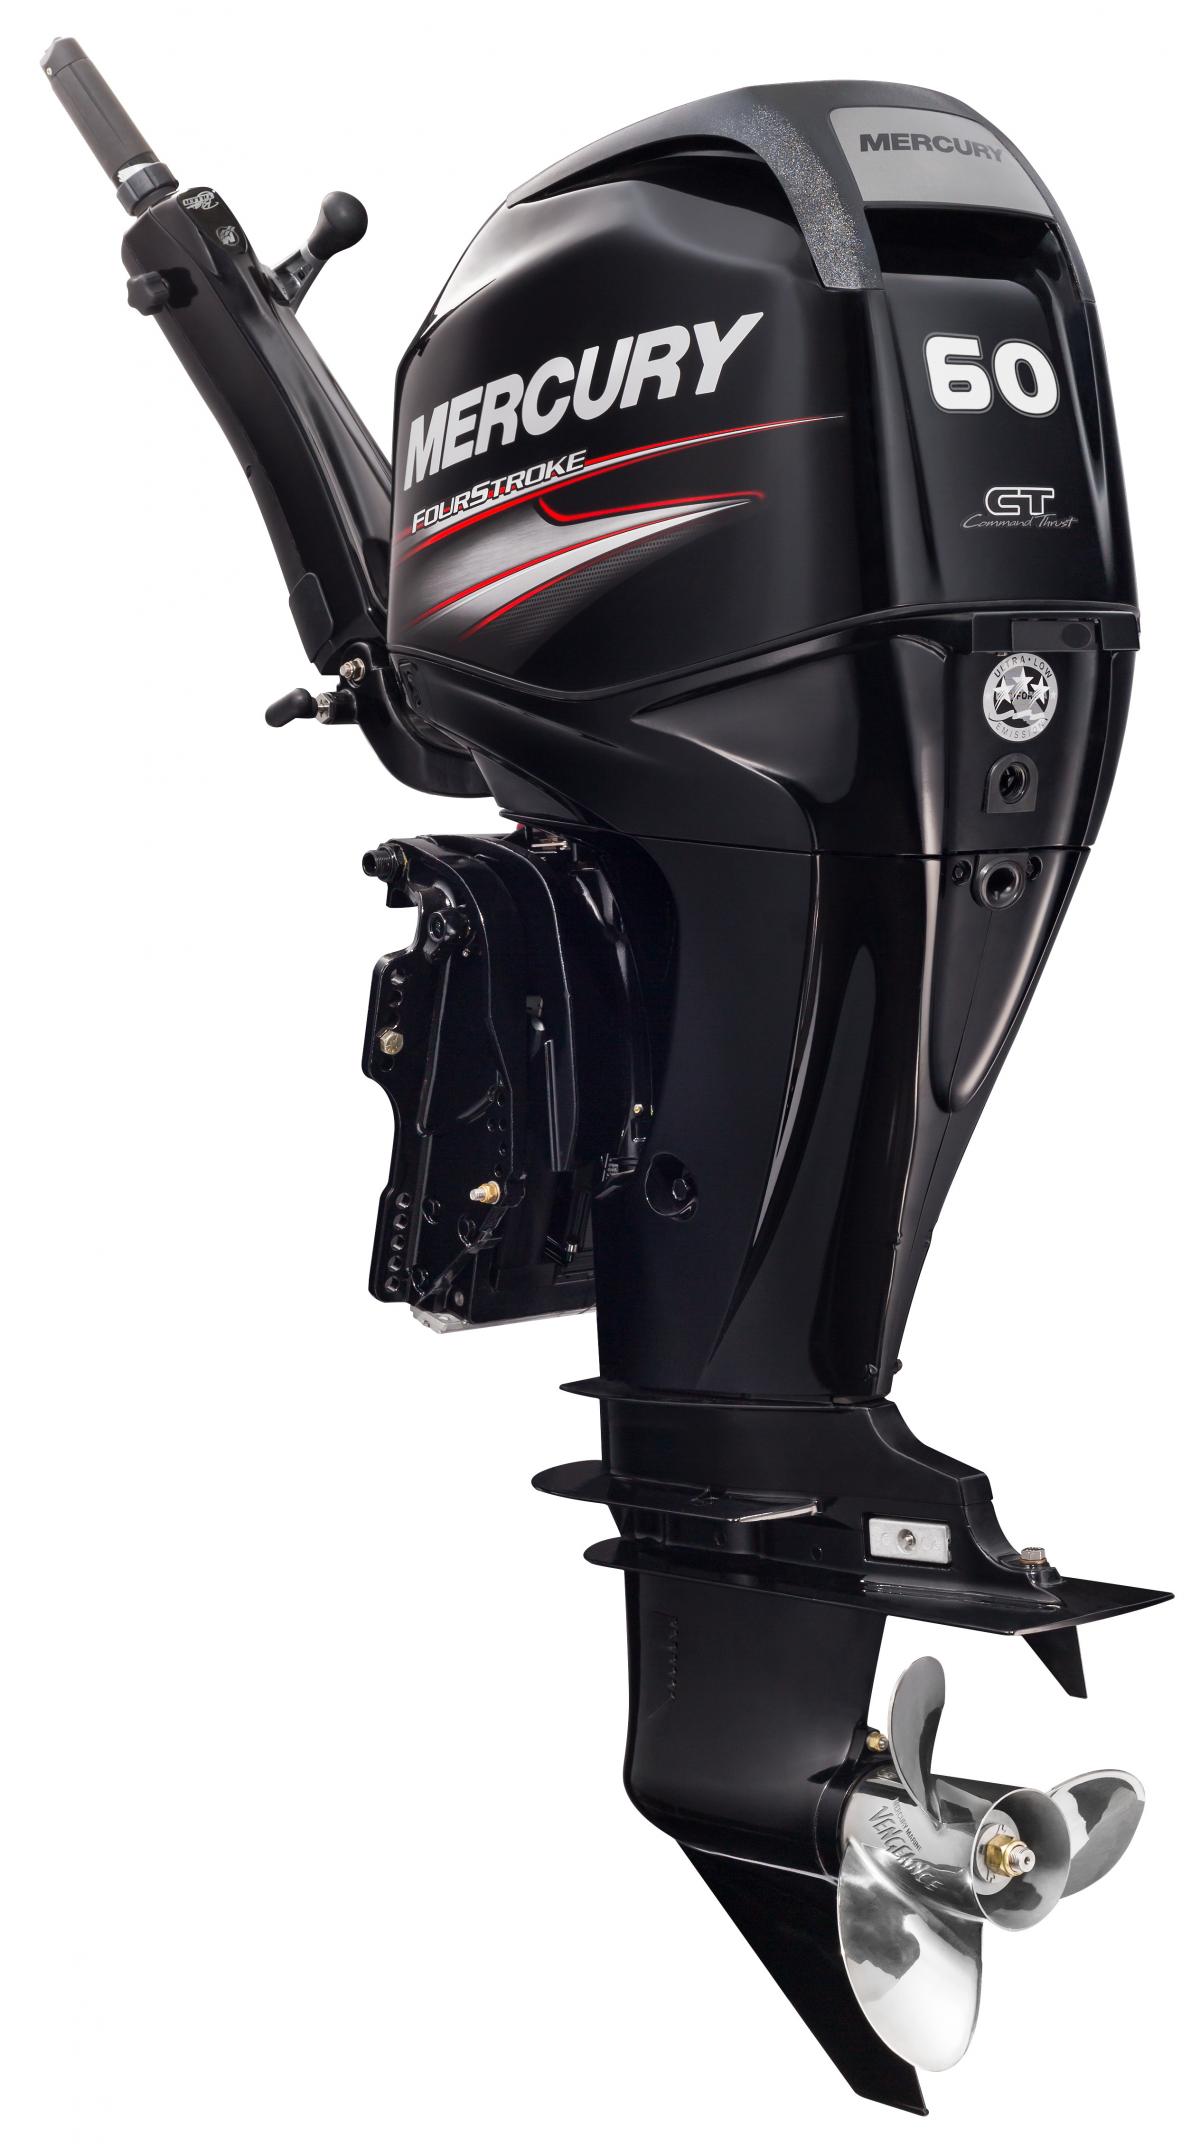 60 hp mercury outboard price